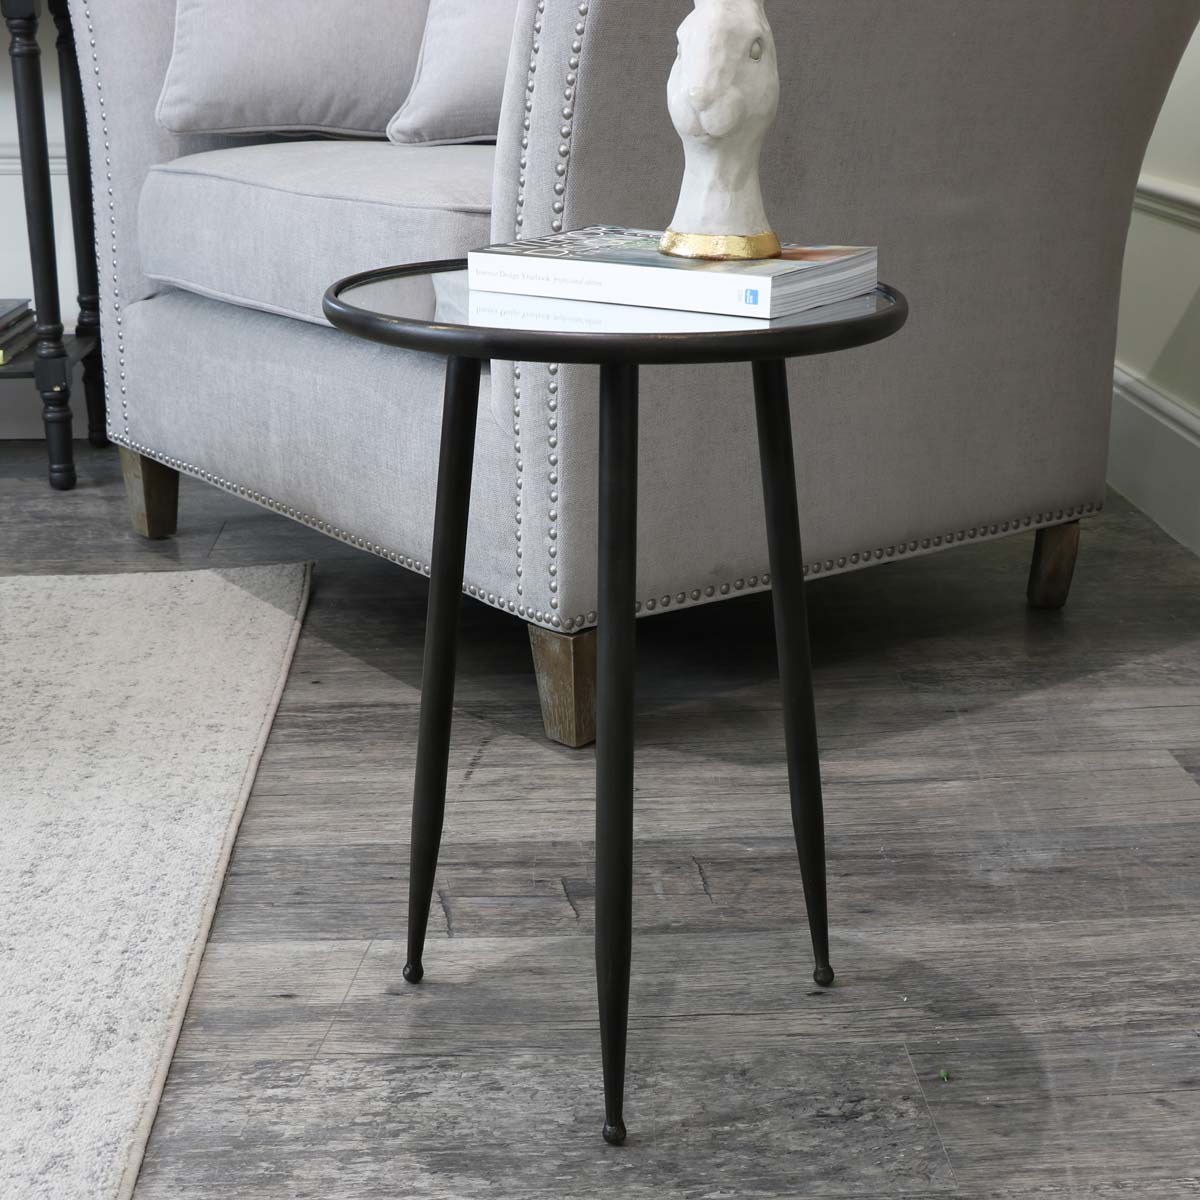 Rustic Black Round Mirrored Glass Top Side Table 